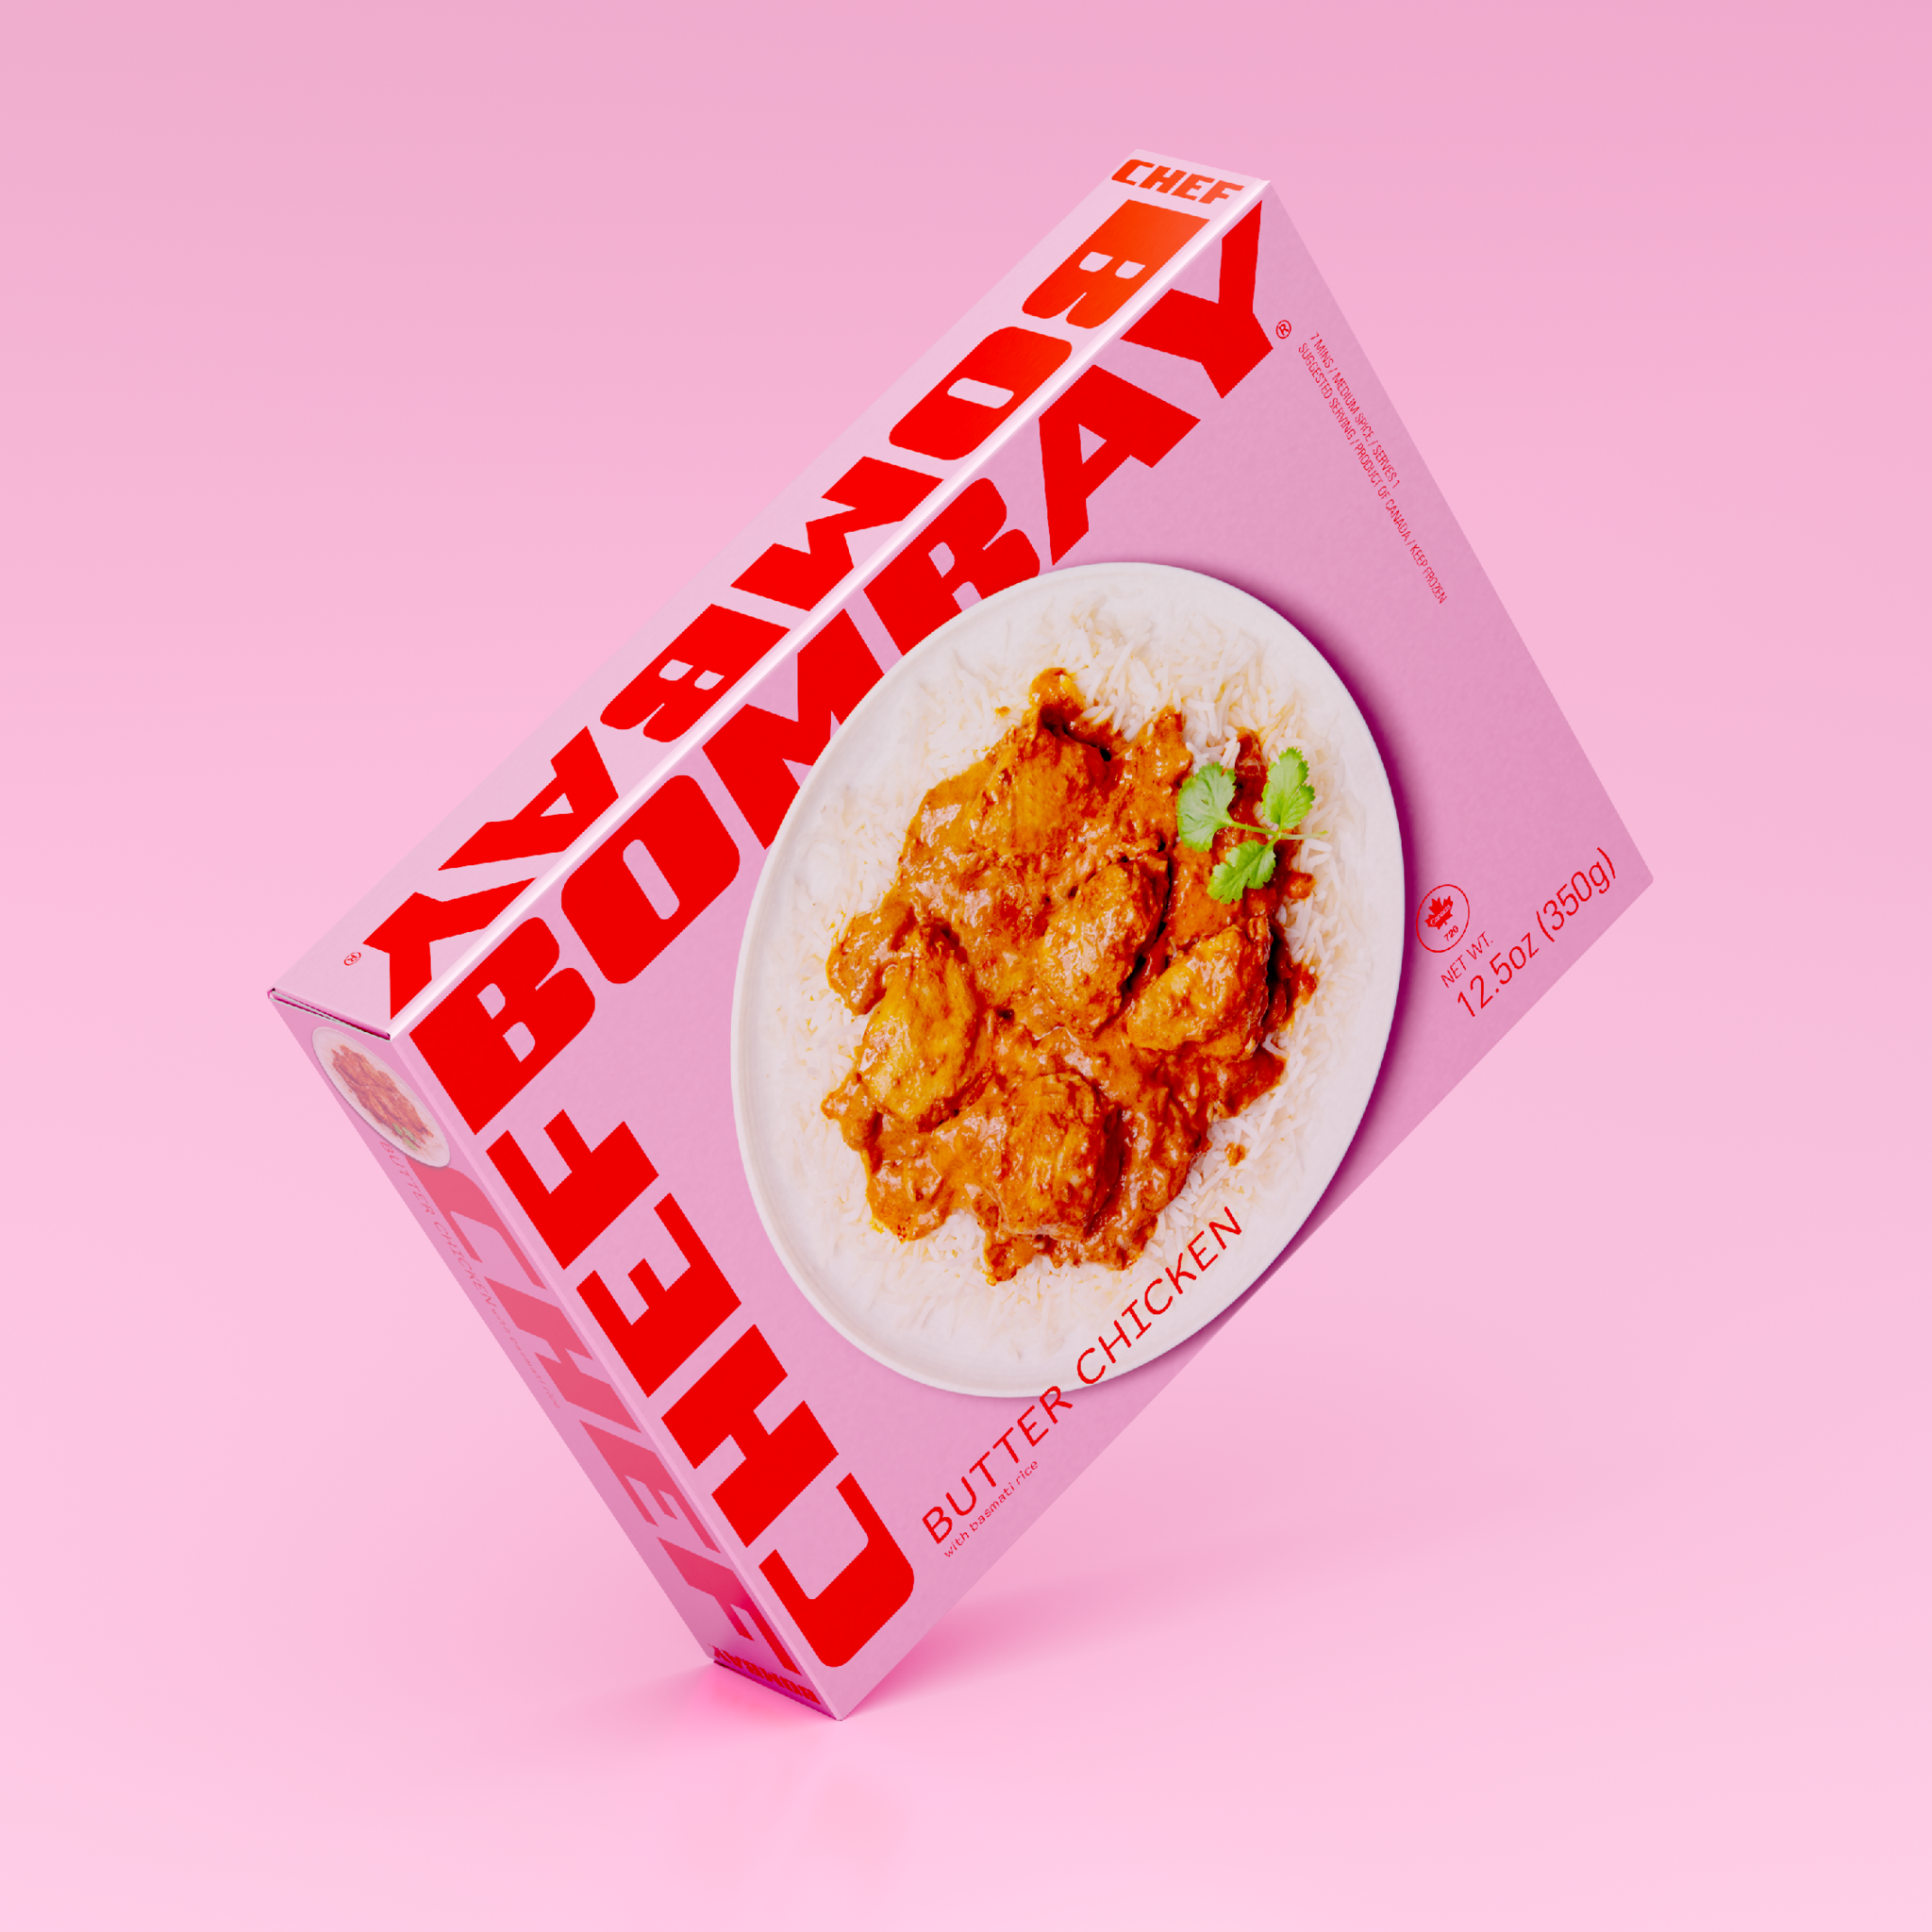 Chef Bombay Butter Chicken box on a pink background